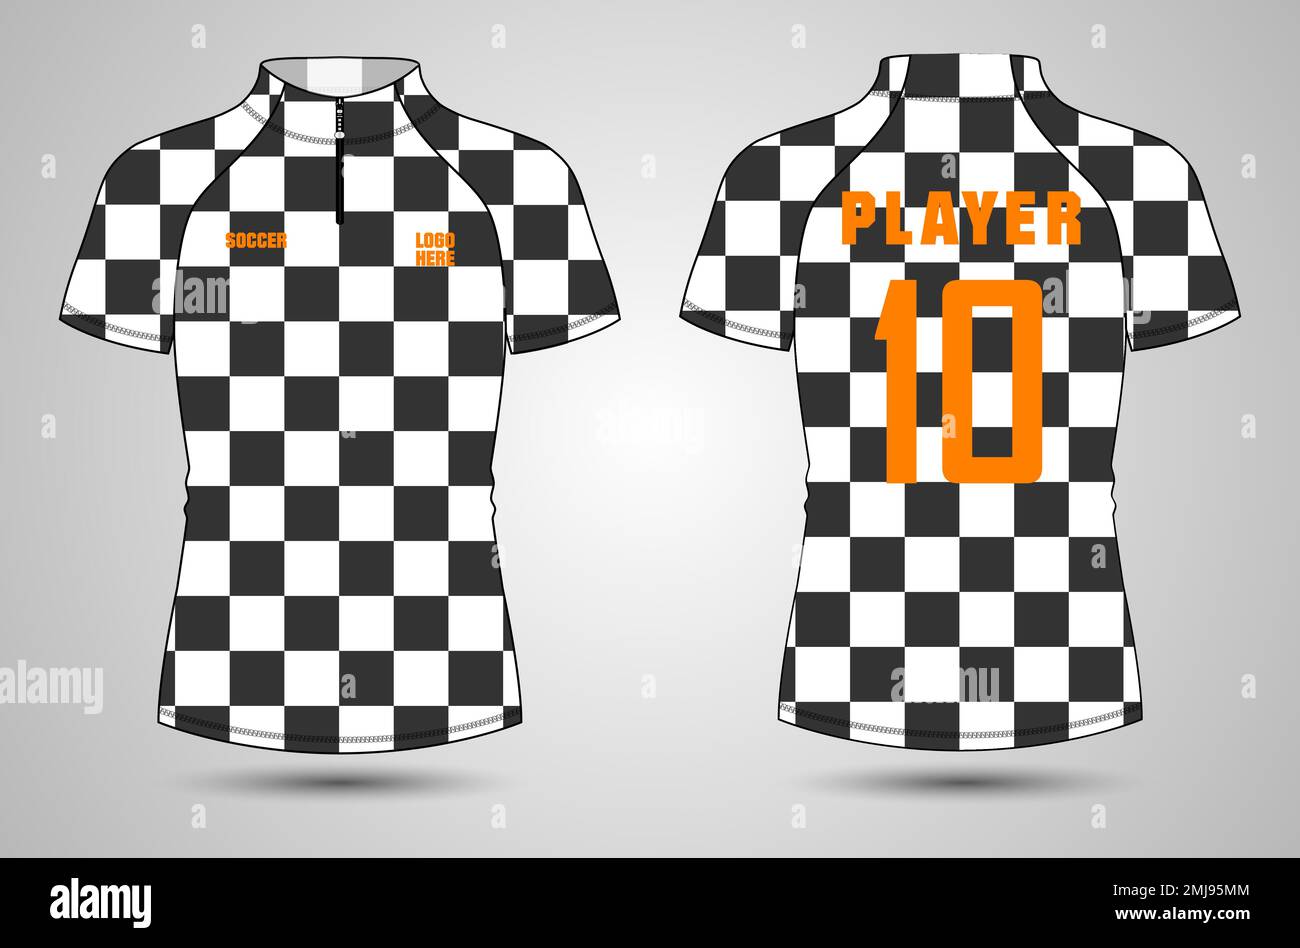 black white jersey template for team uniforms and Soccer t shirt